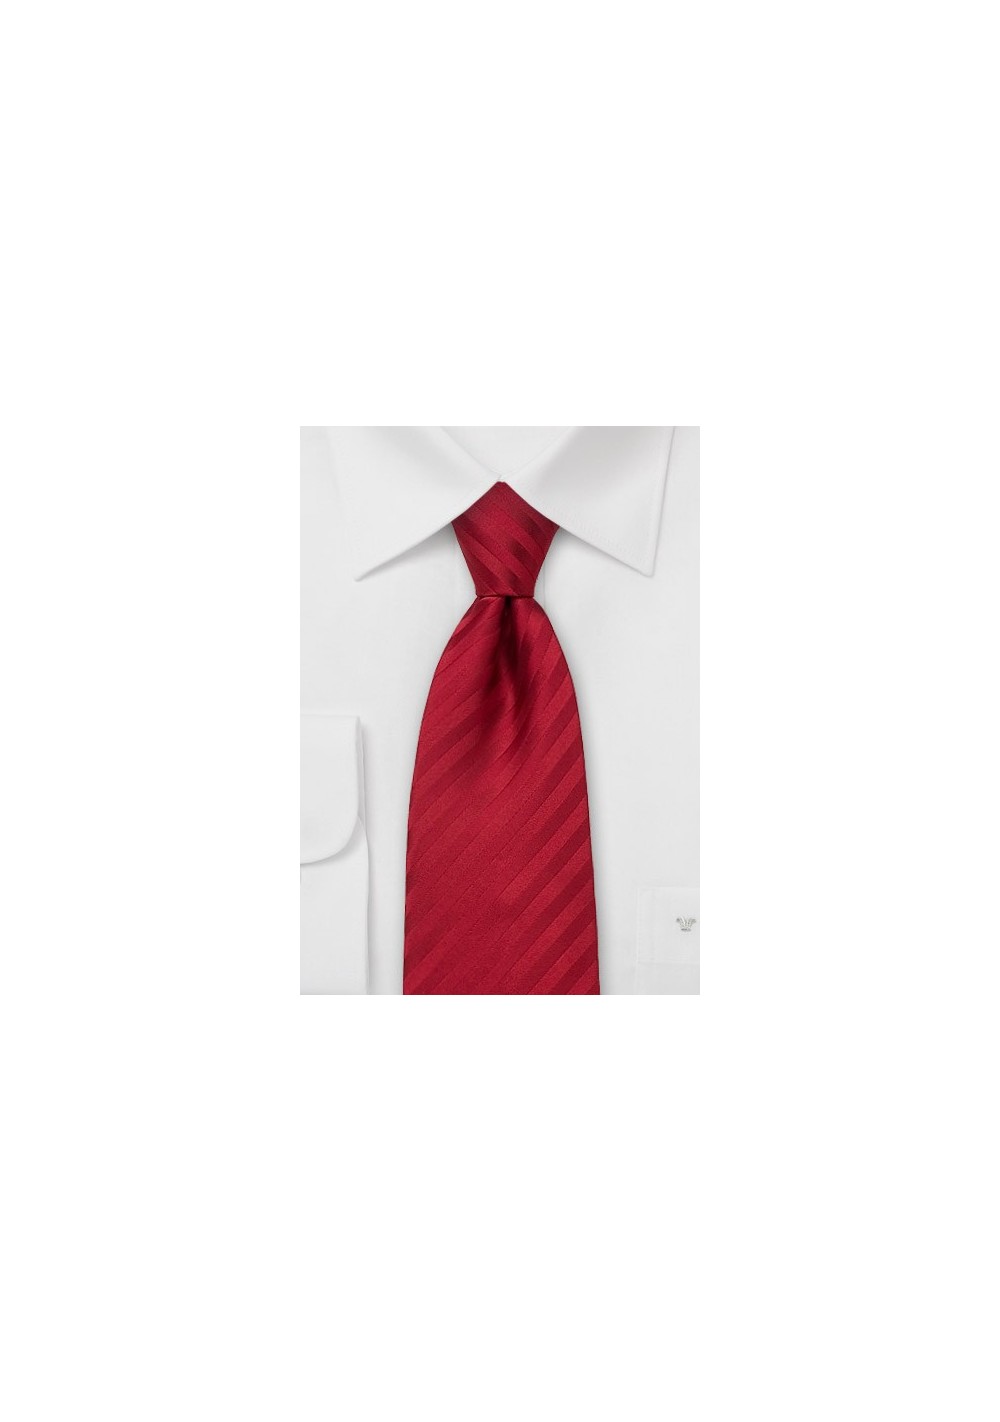 Bright Red Silk Tie in Extra Long